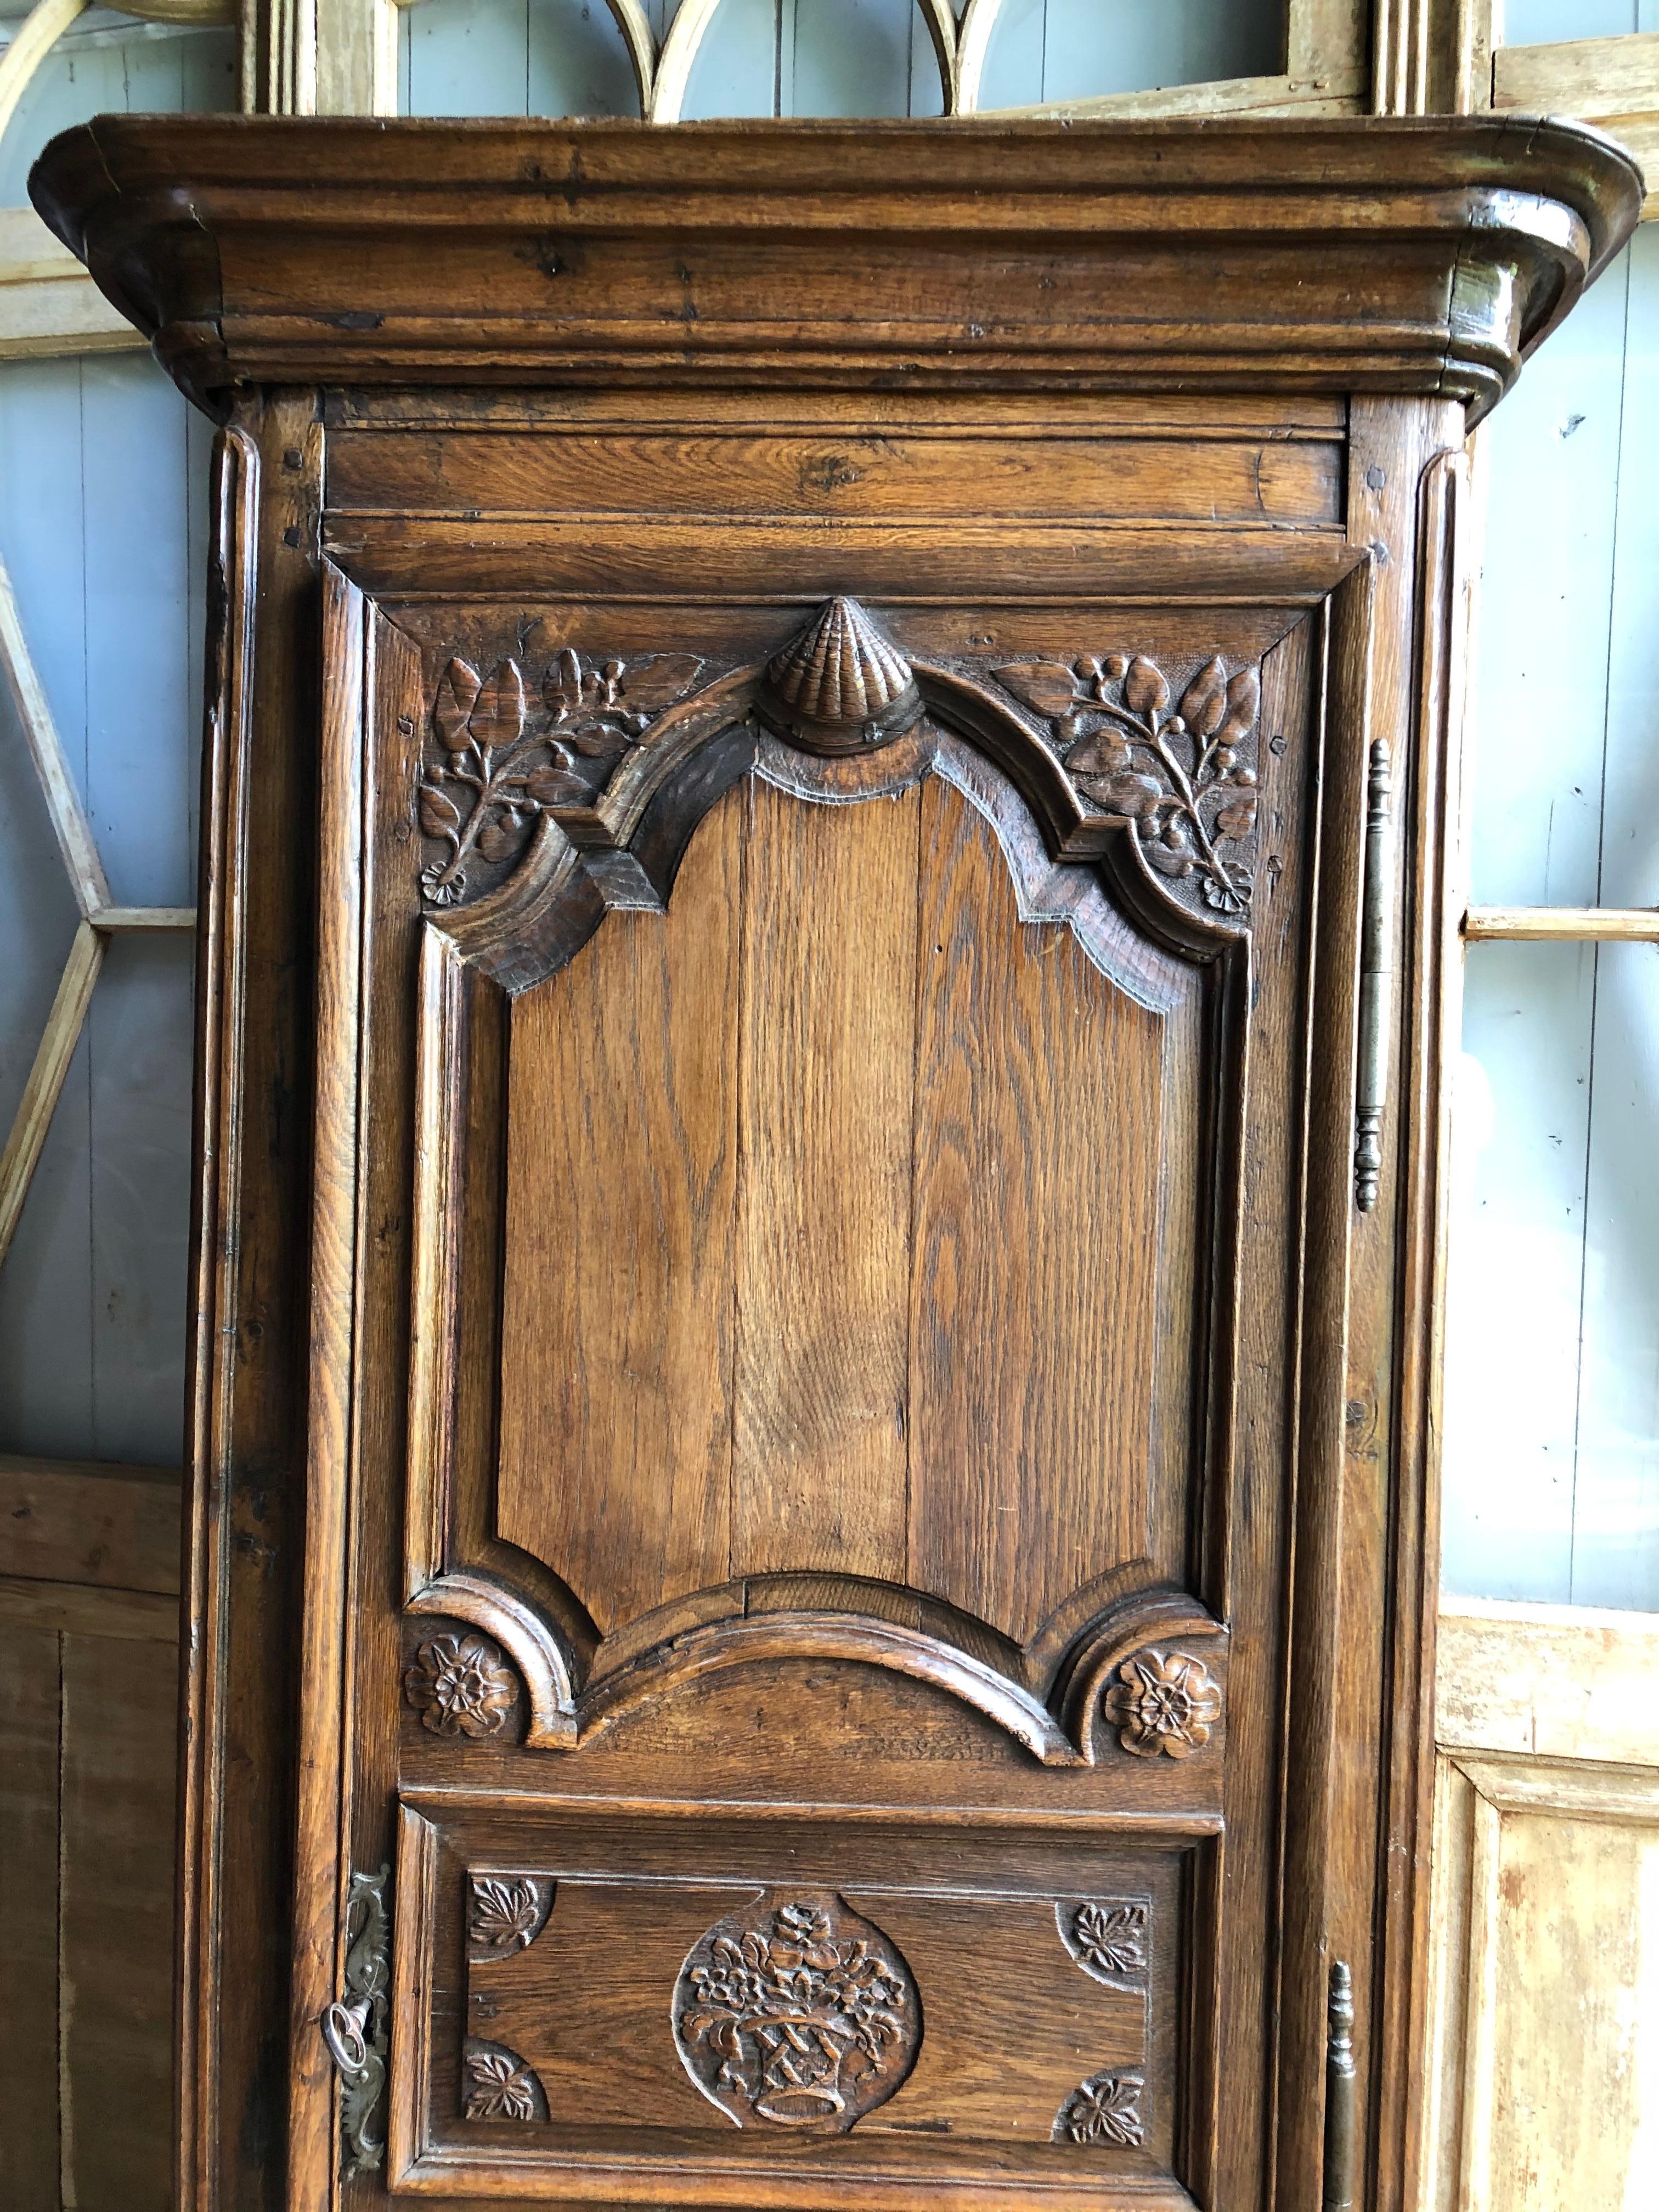 A mid to late 18th century French bonnetiere in oak, Normandy/Brittany region in the Louis XV style, with nicely carved decoration of flowers and a central scallop shell on the door, original lock and key and with 3 interior shelves. These narrow